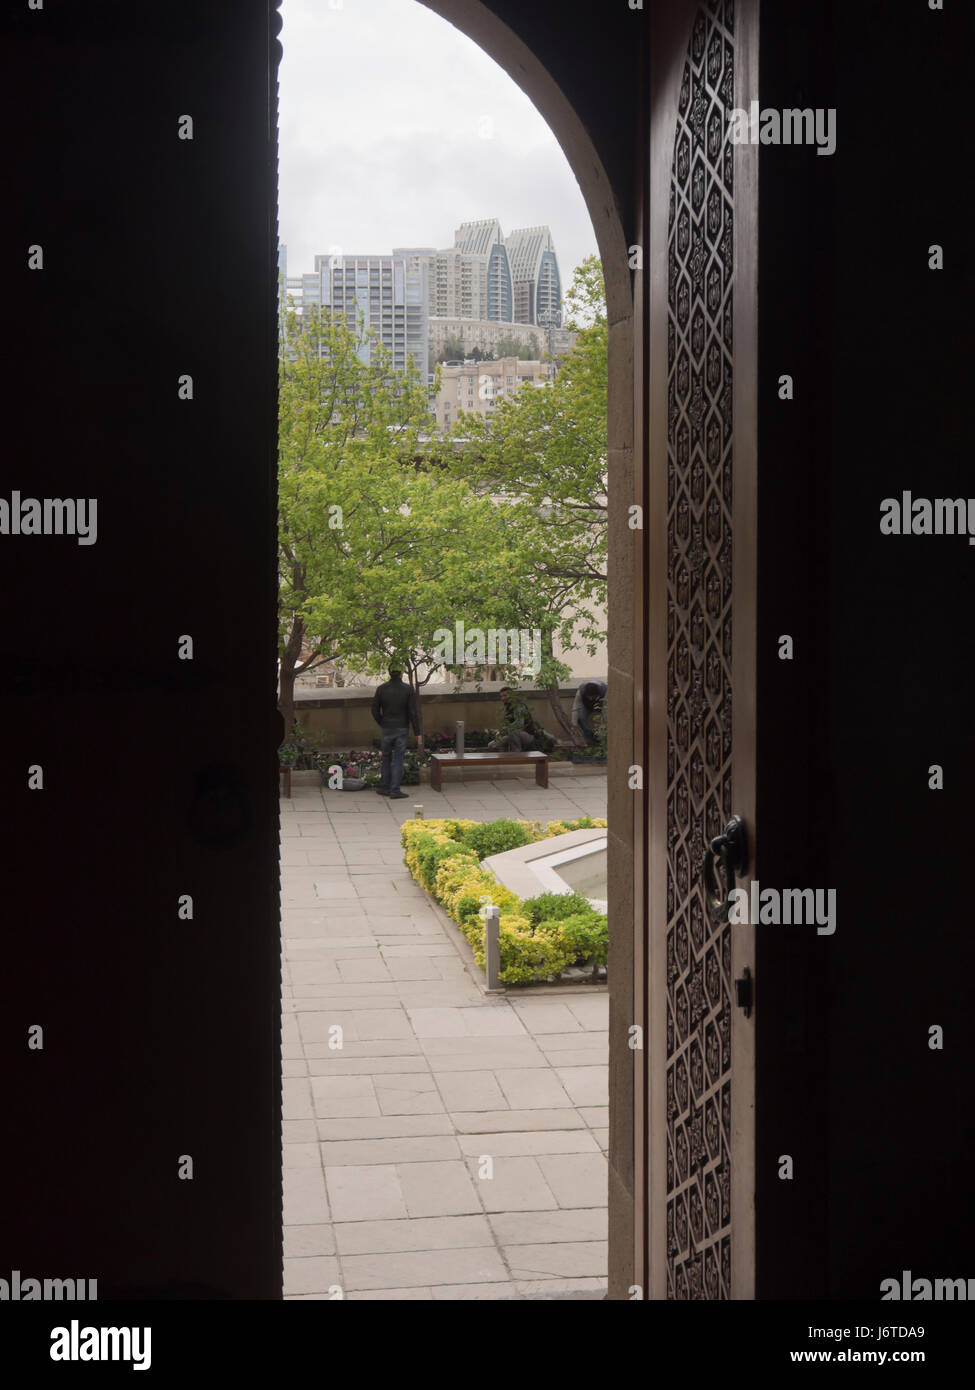 Palace of the Shirvanshahs, a Unesco world heritage site in the old walled city in Baku Azerbaijan, view of city from main doors Stock Photo